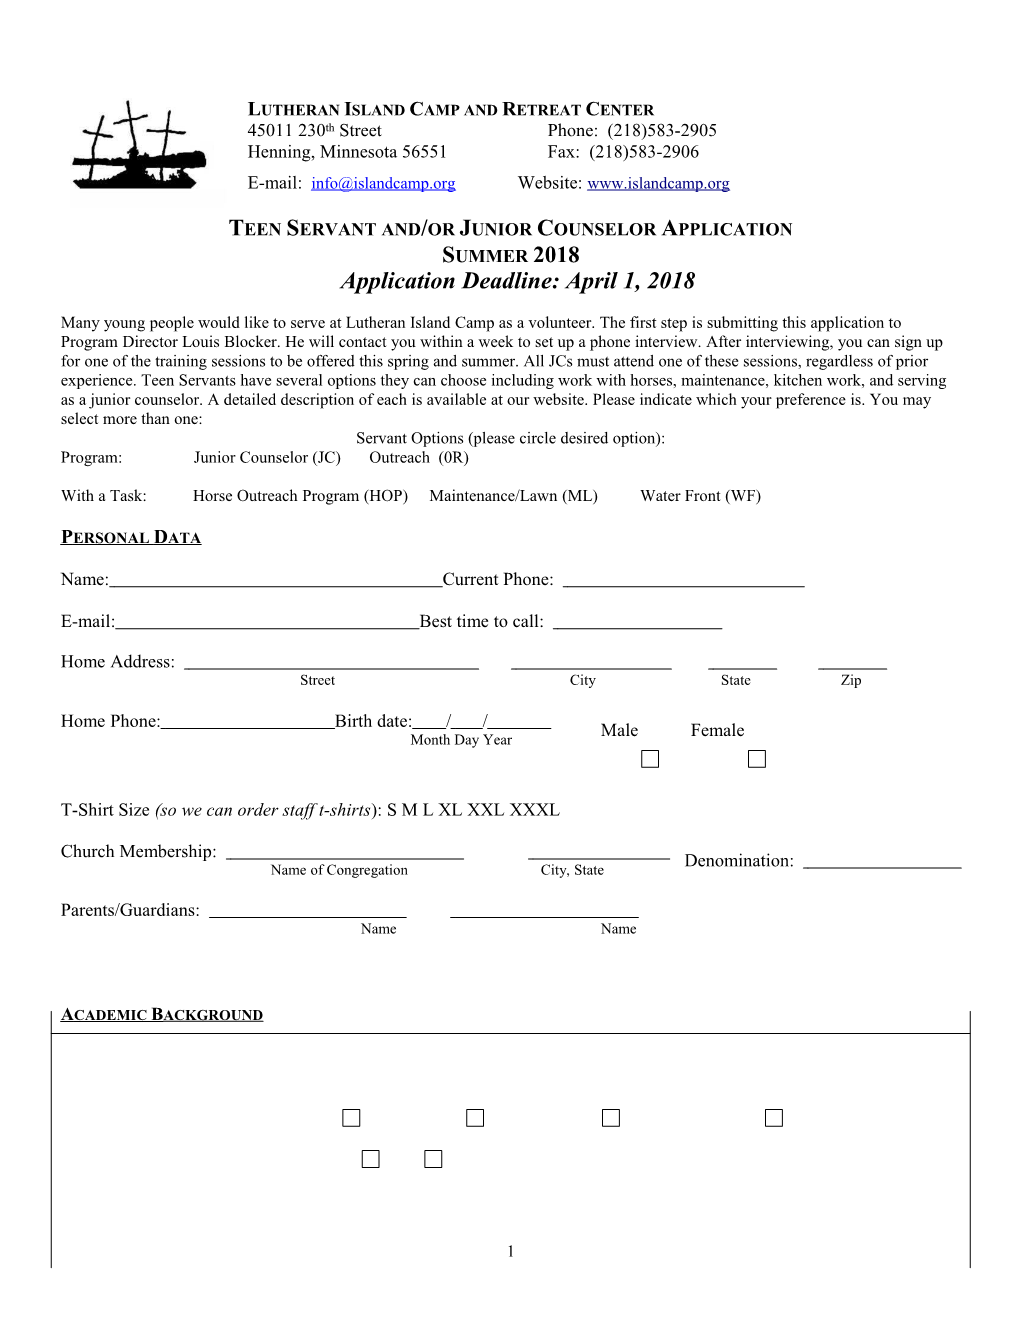 Teen Servant And/Or Junior Counselor Application Summer 2018